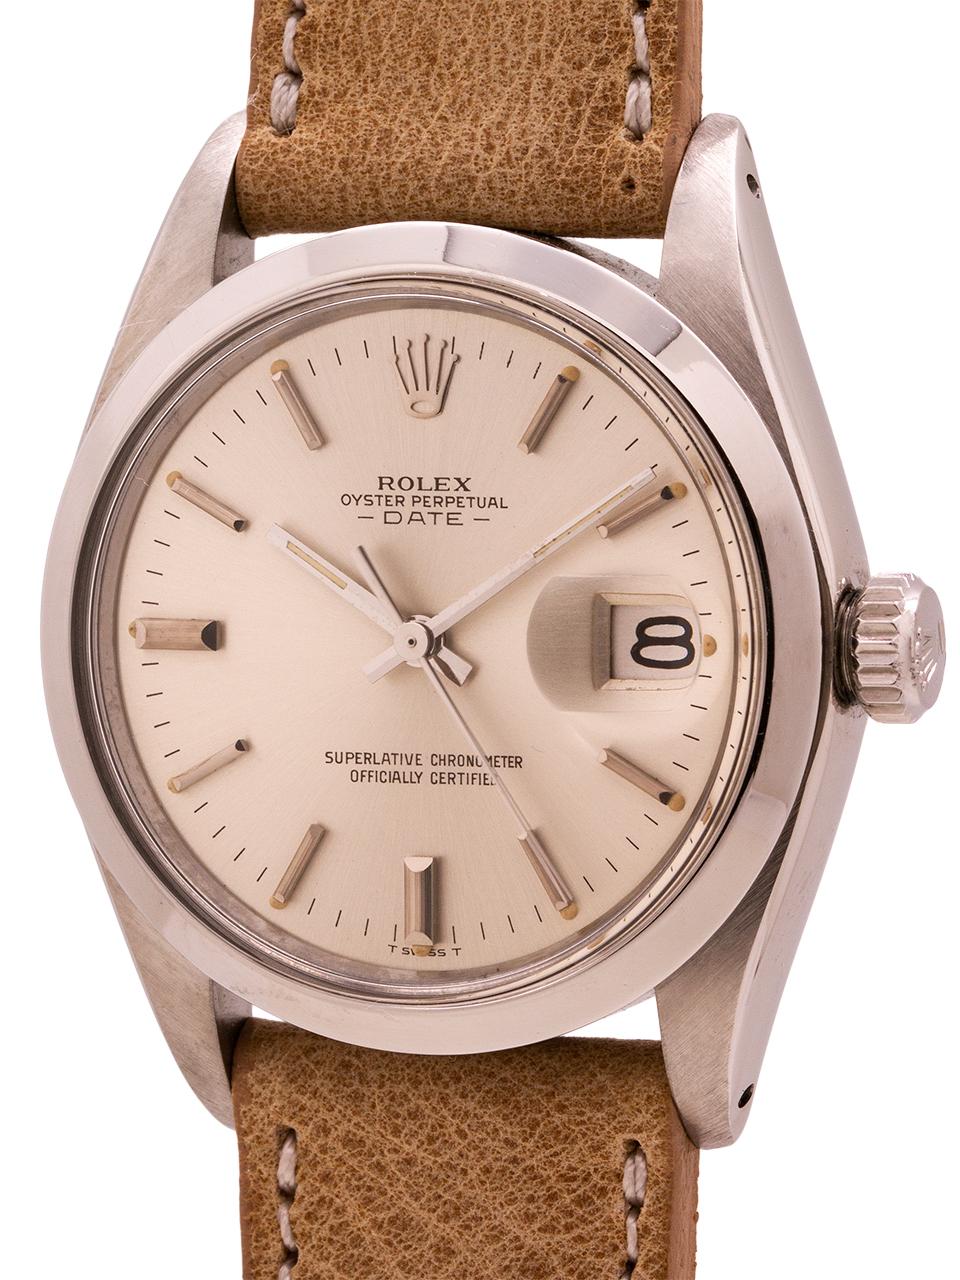 Rolex Stainless Steel Oyster Perpetual Date Ref# 1500, circa 1970 In Excellent Condition For Sale In West Hollywood, CA